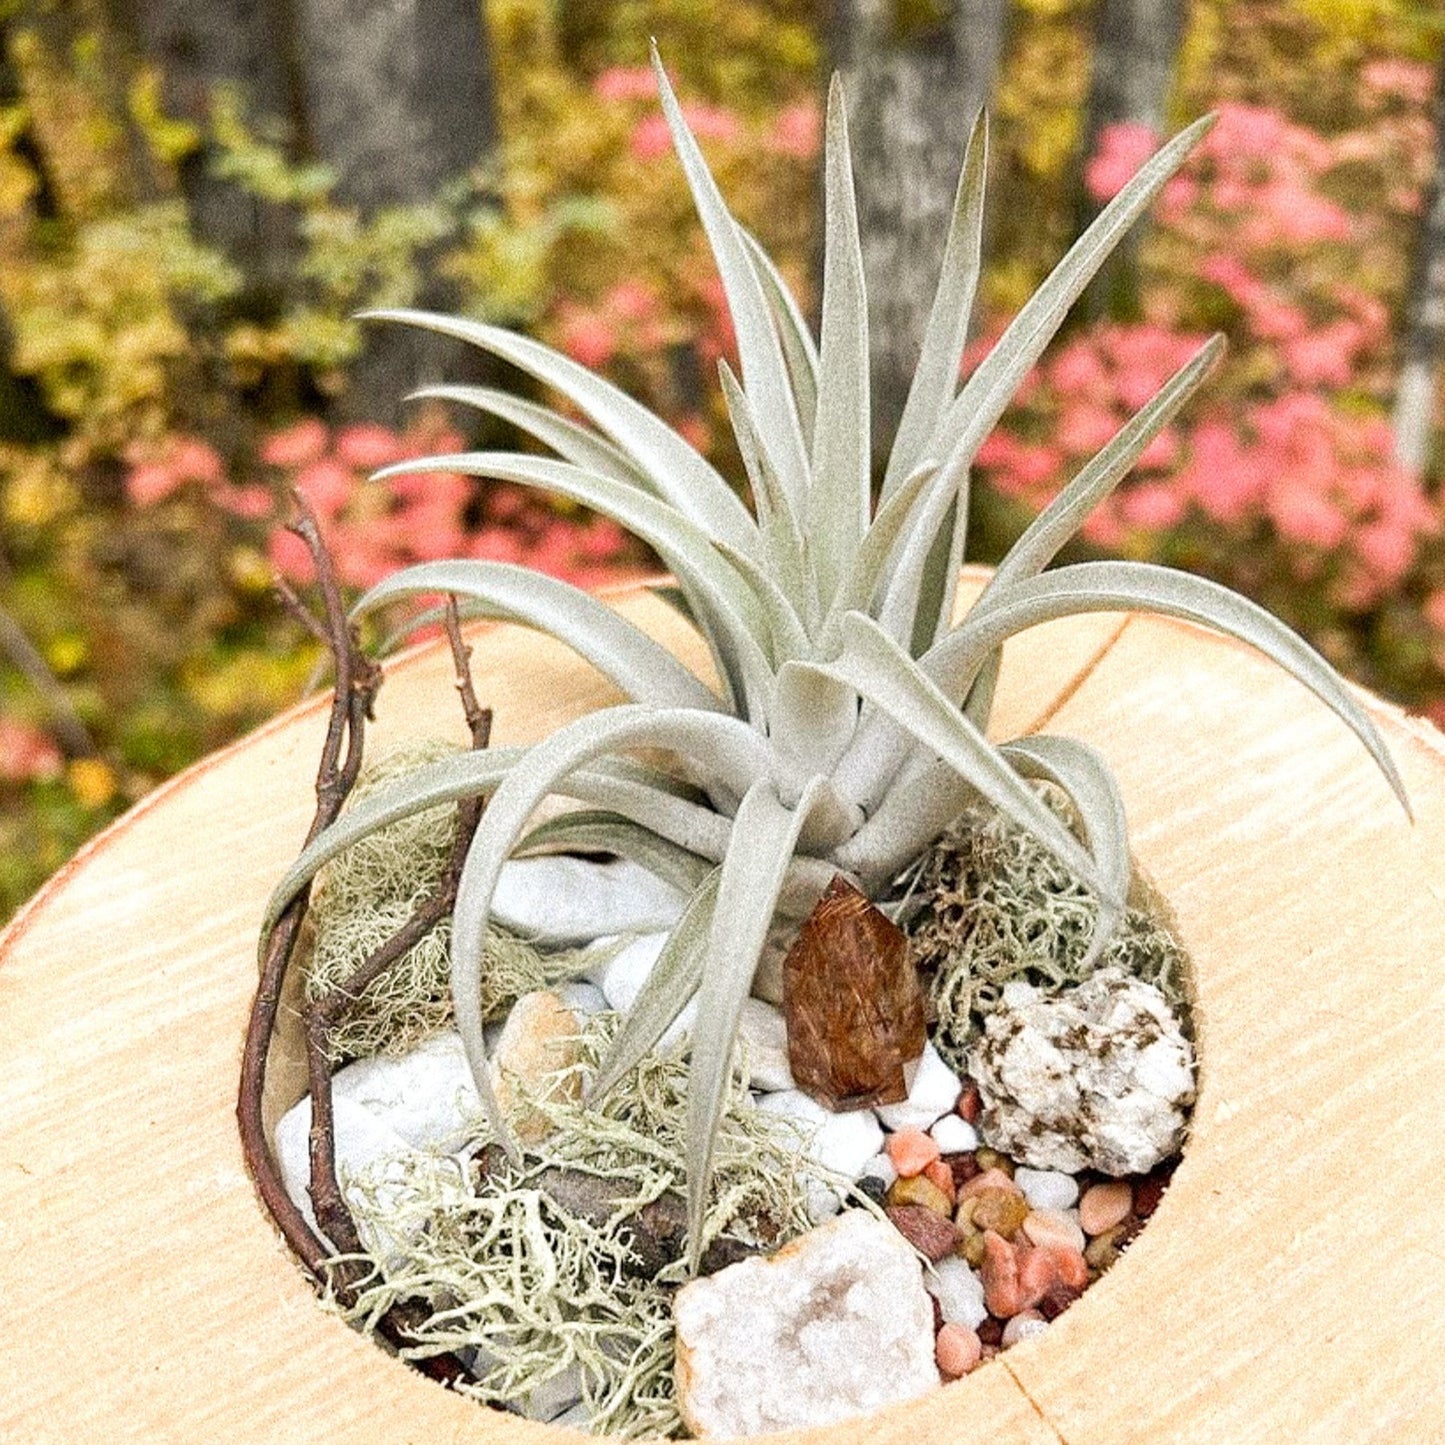 ADMISSION Into the Woods— Boreal Forest Air Plant Workshop with Passionate Gem